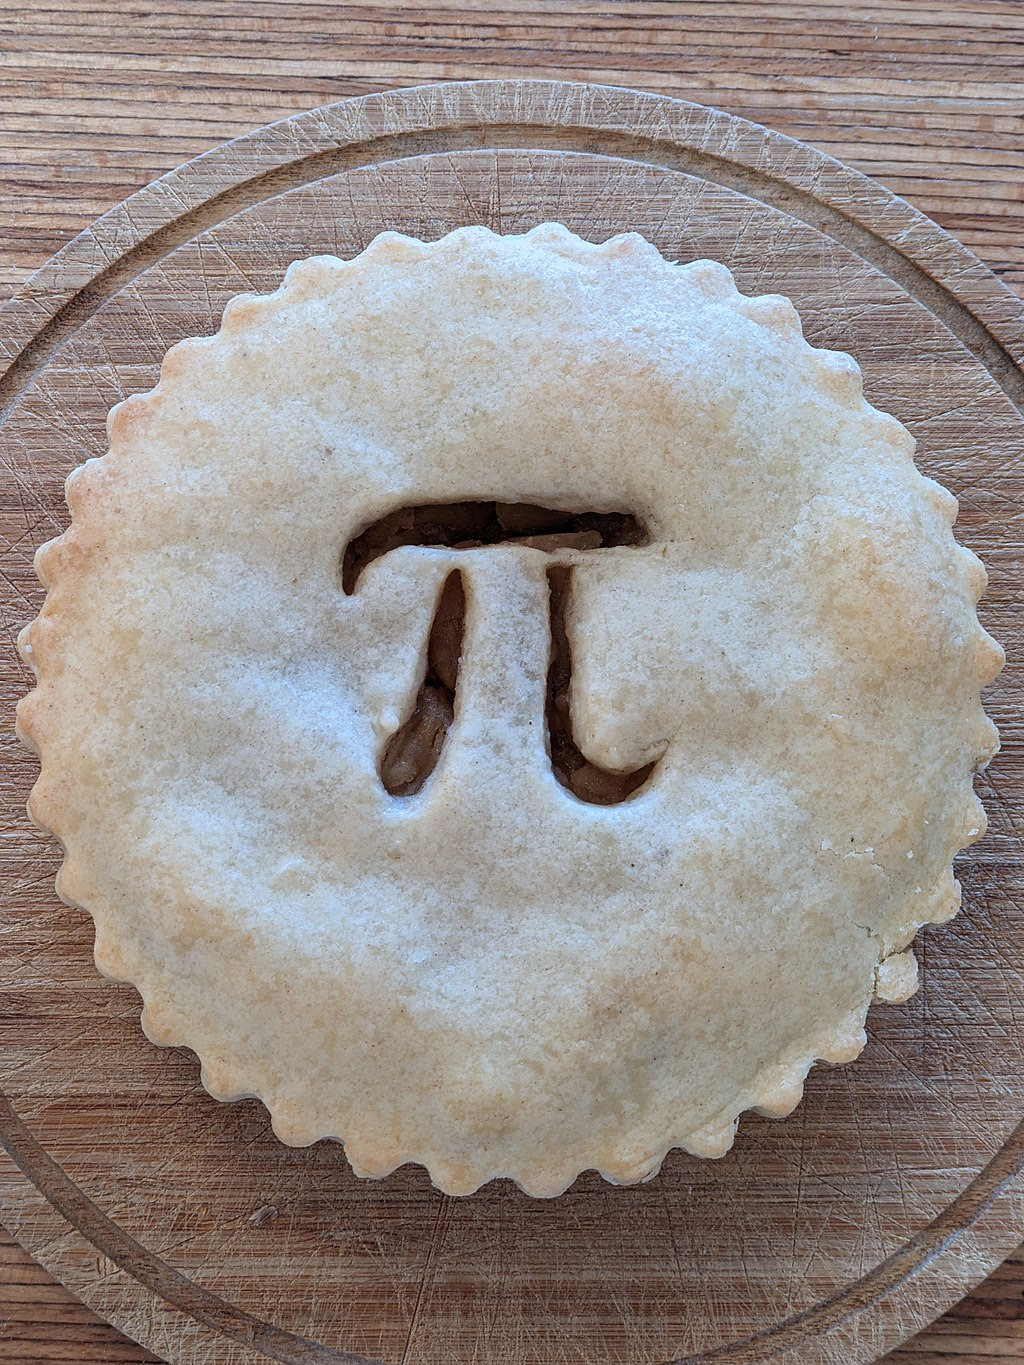 Pi pie. Source https://commons.wikimedia.org/wiki/File:Pie_day_apple_pie_5.jpg Shisma, CC BY 4.0 <https://creativecommons.org/licenses/by/4.0>, via Wikimedia Commons